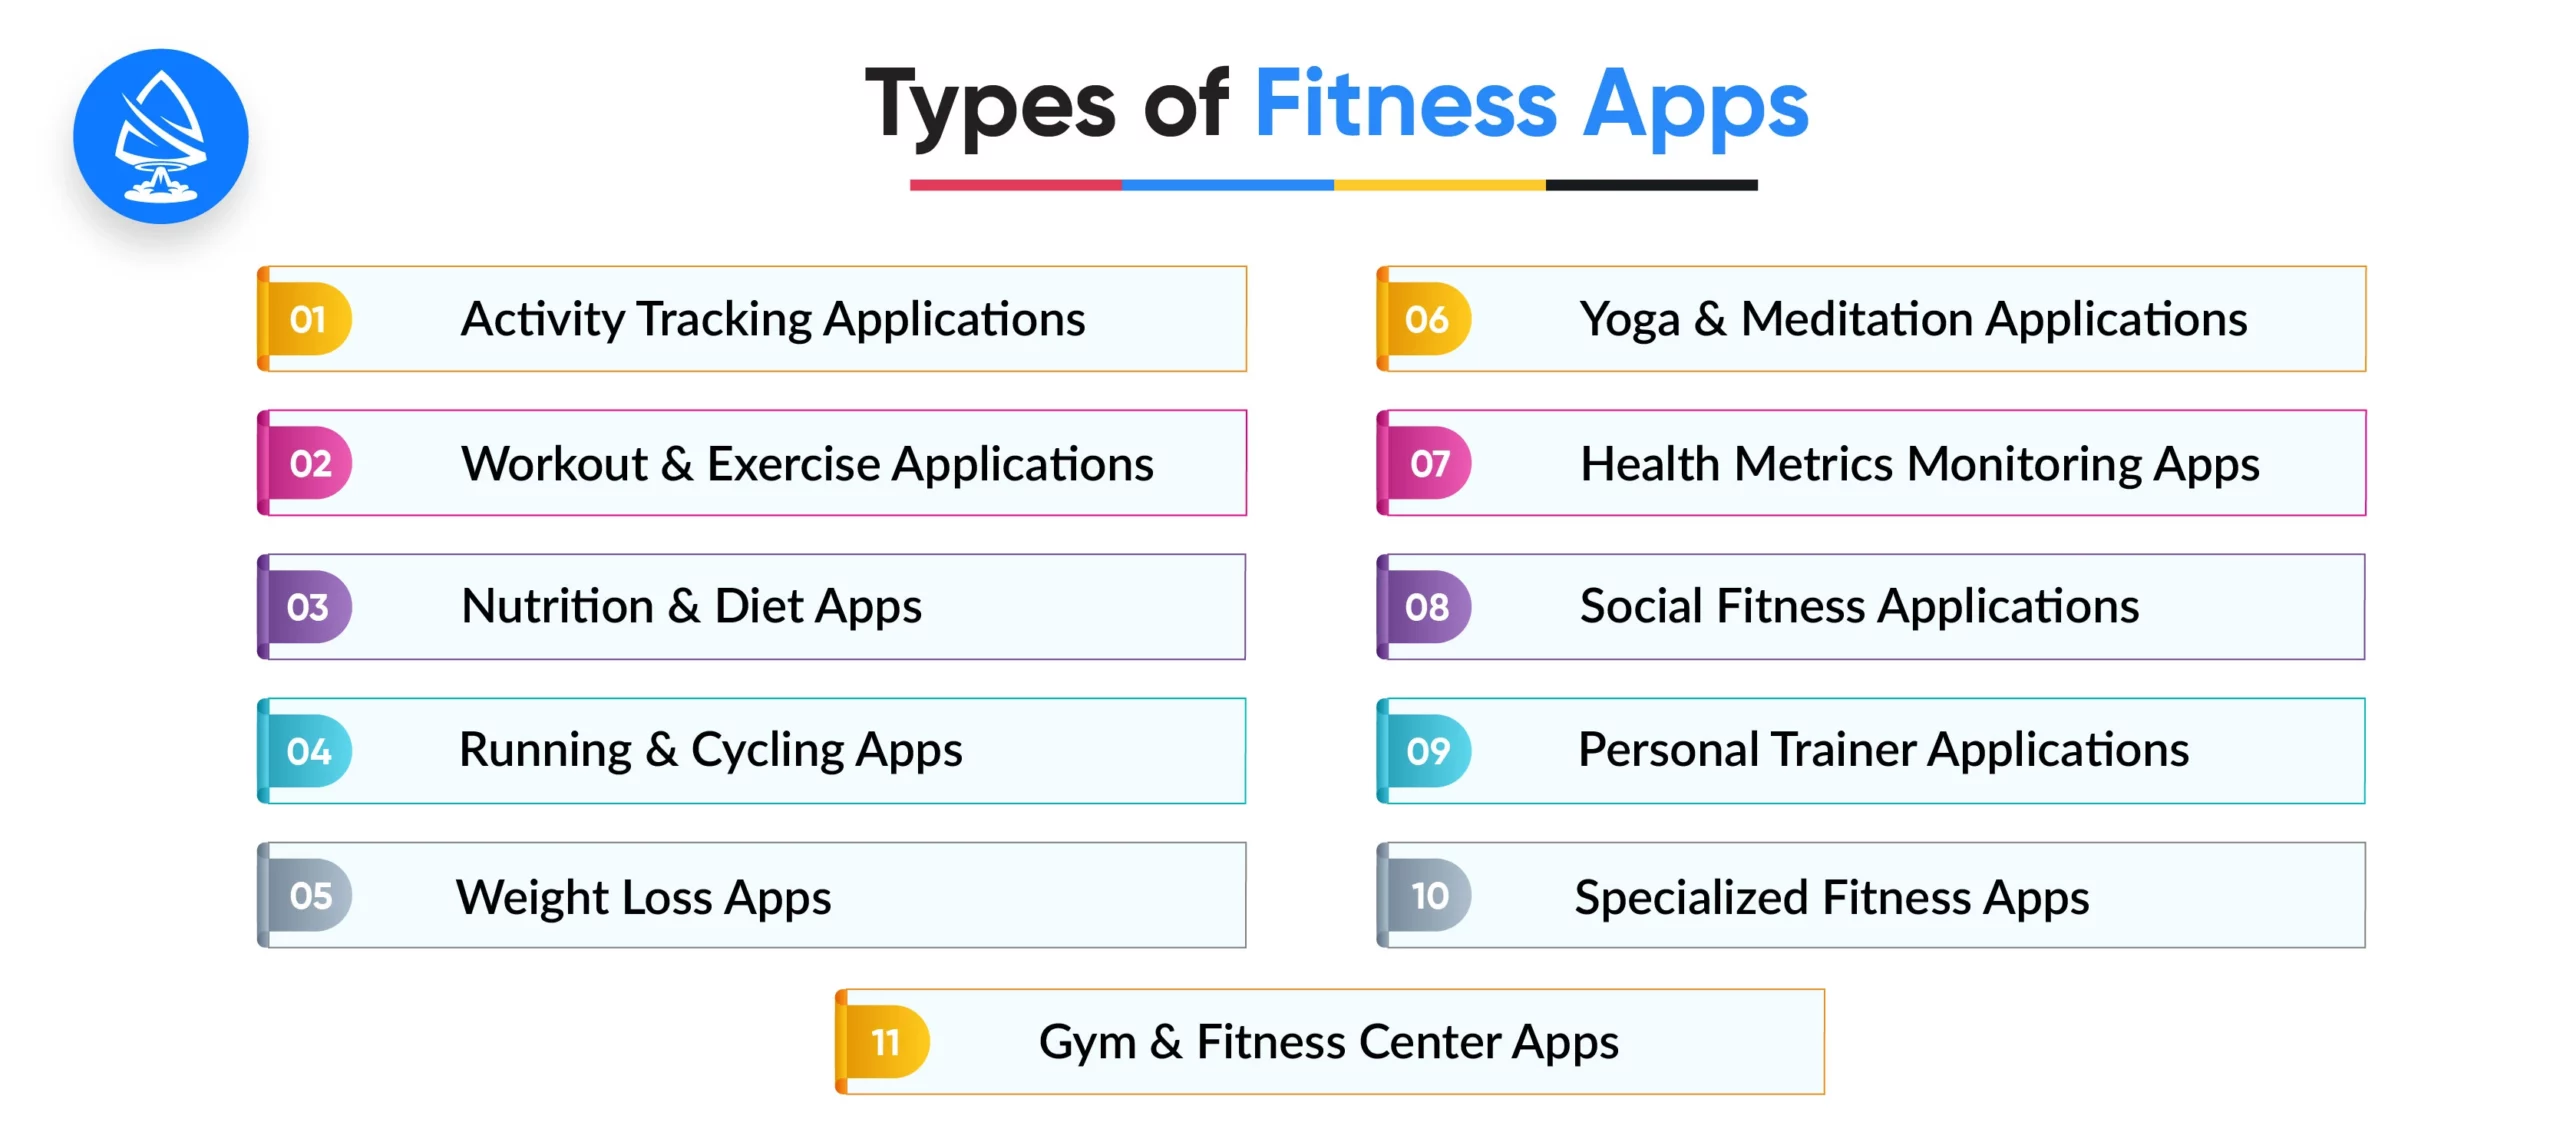 Navigating the Types of Fitness Apps